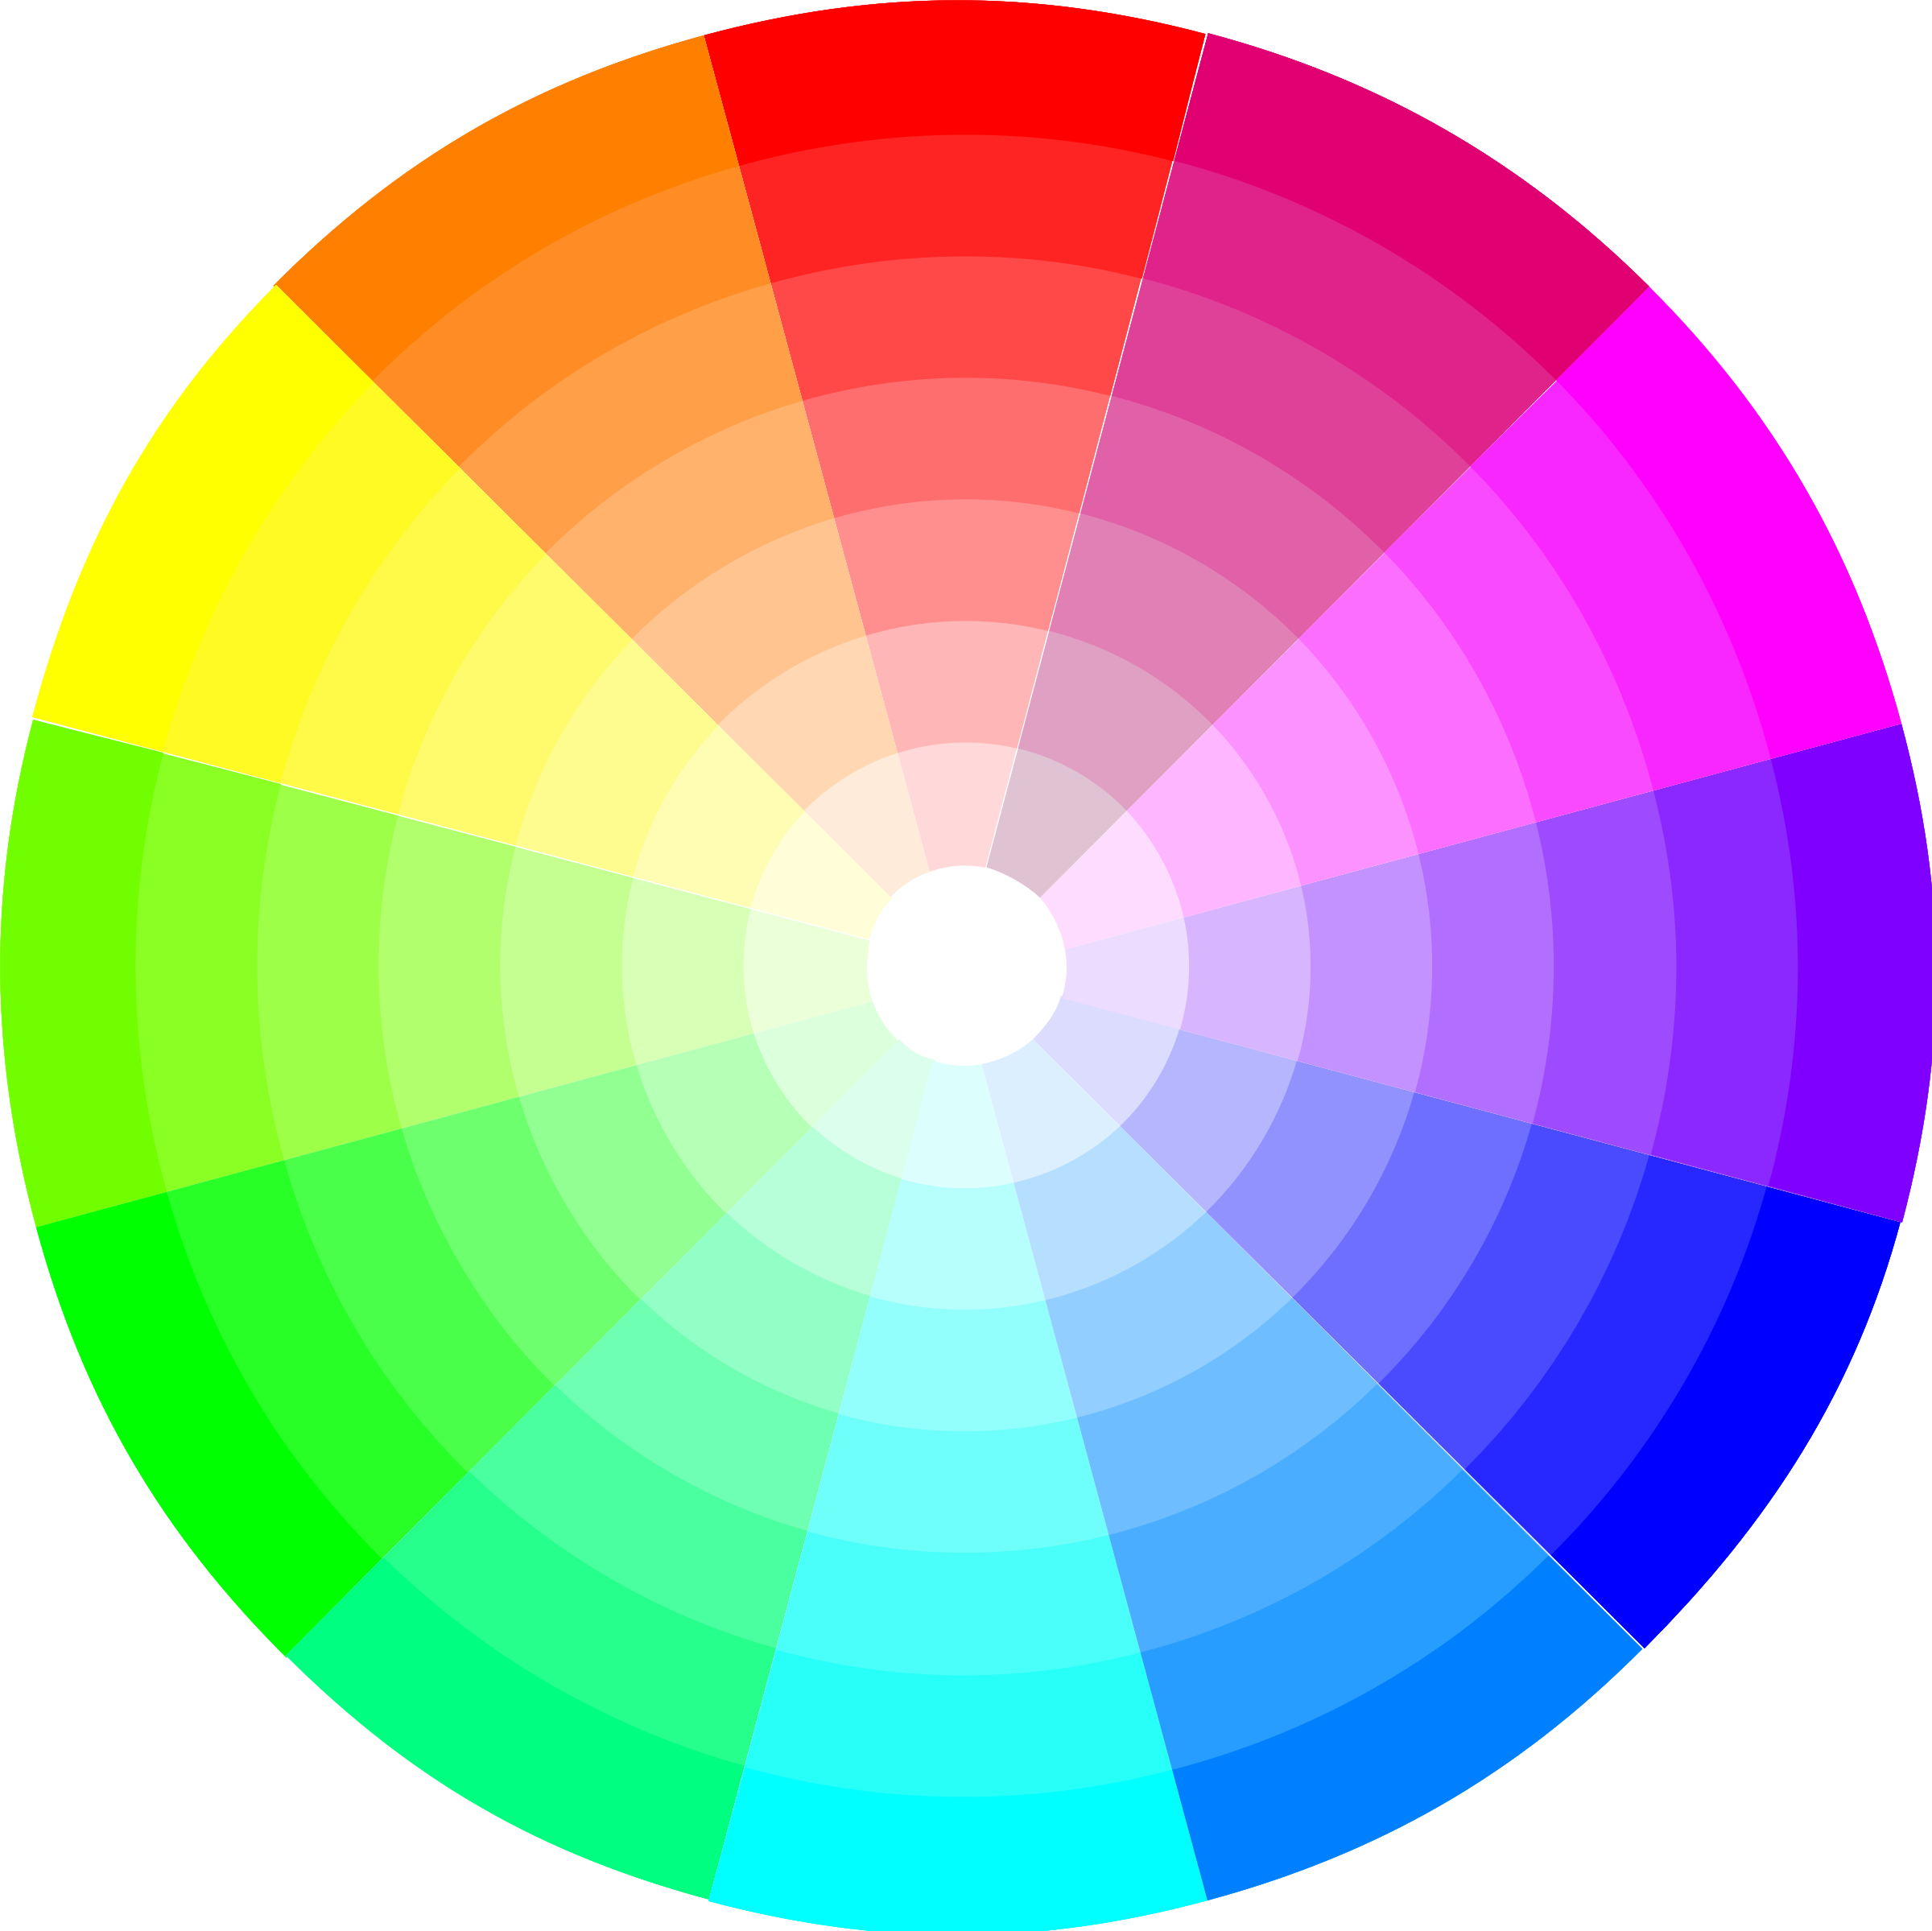 Wheel composed of all the colors in the color spectrum